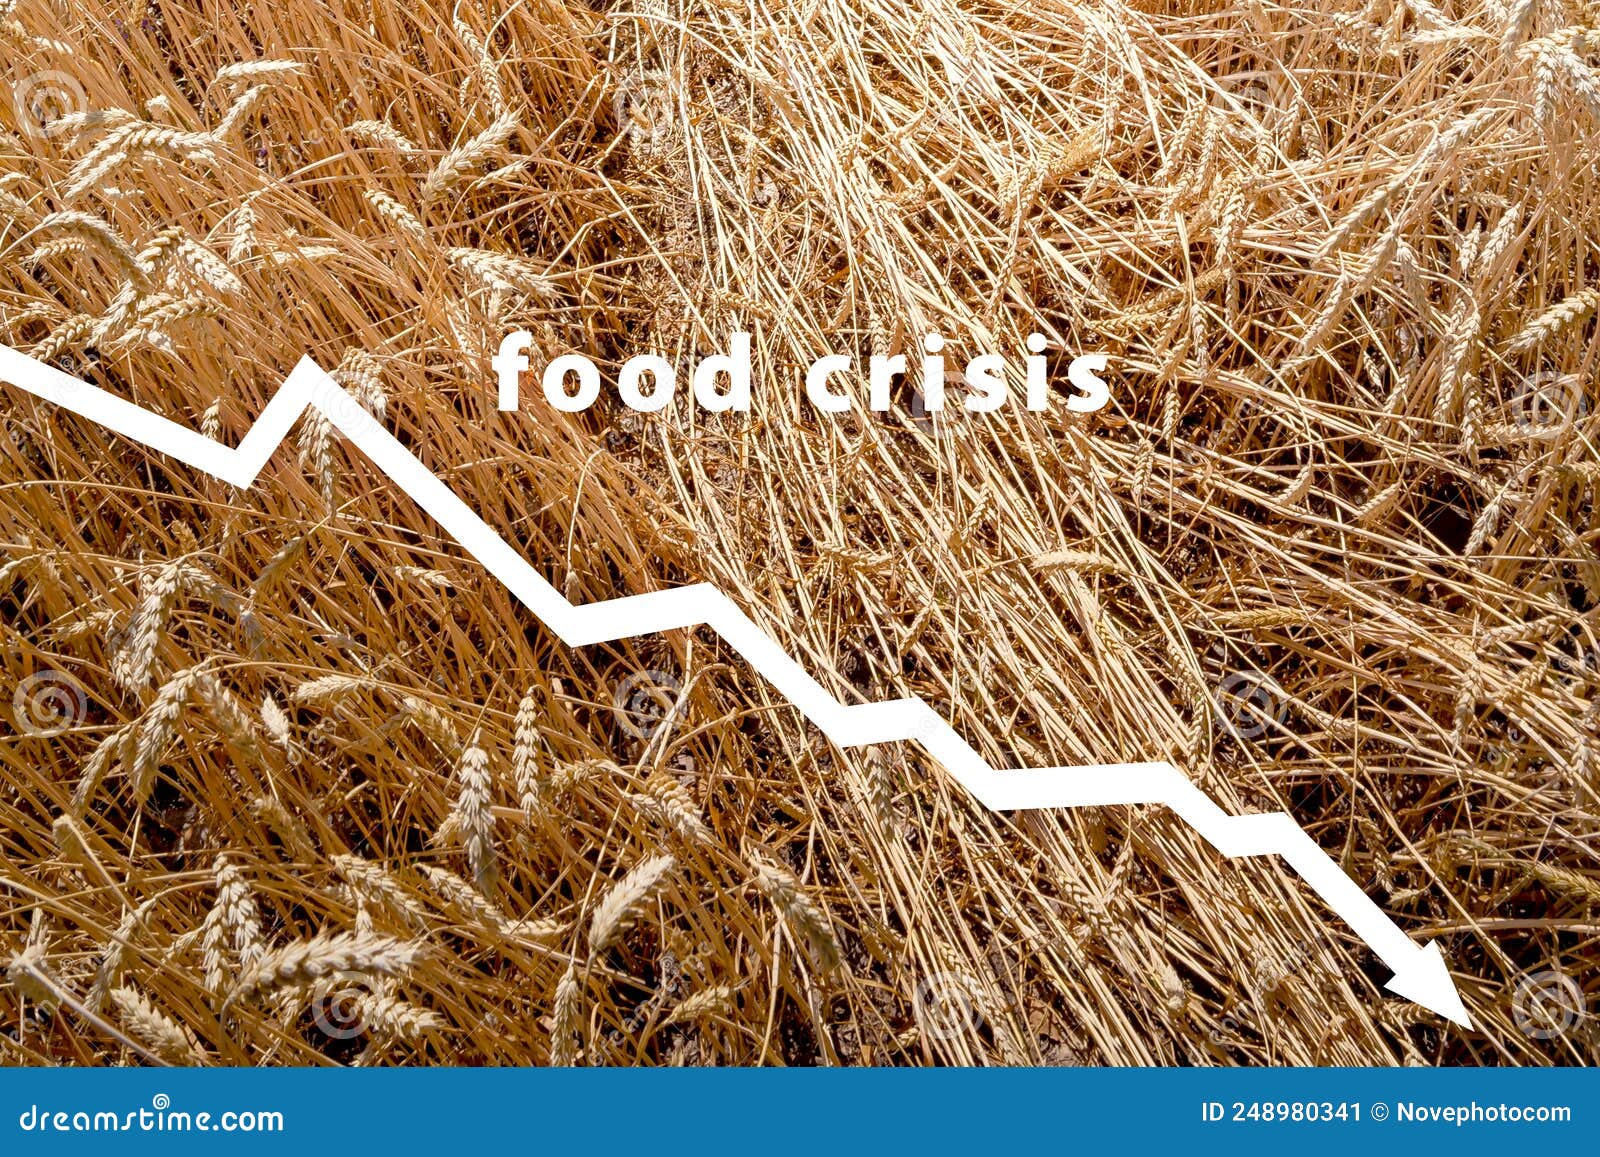 Food Crisis Cereal Crop Failure The Shortage Of Bread Russian